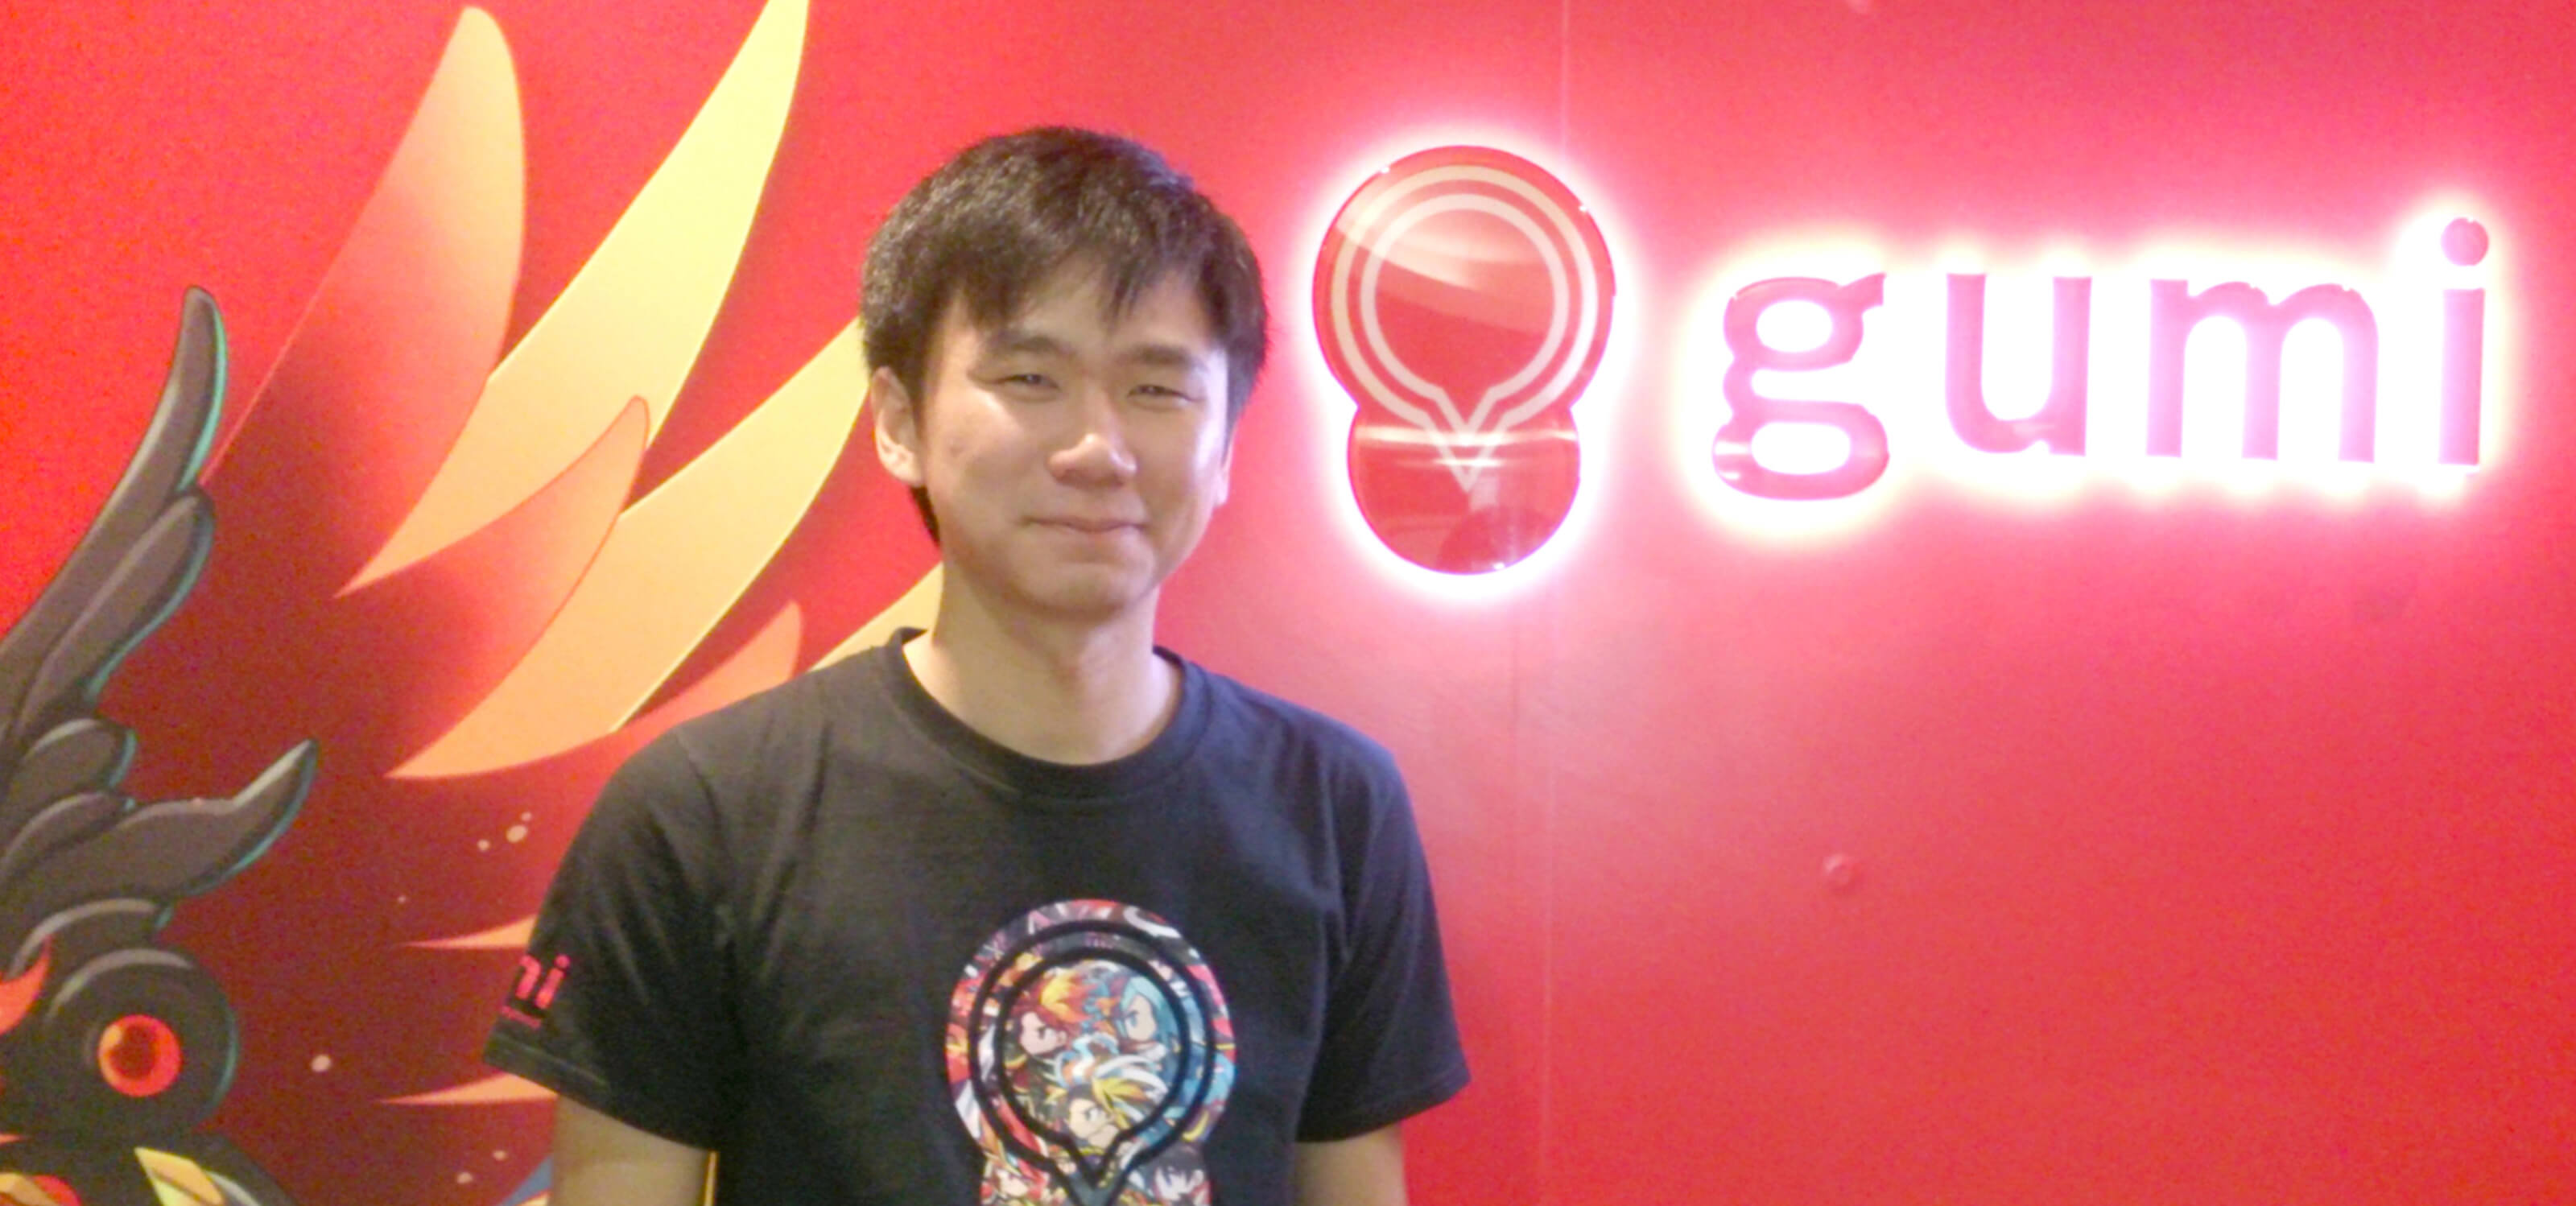 DigiPen graduate Soh Huajin stands in front of a red wall with a glowing logo for gumi Asia behind him